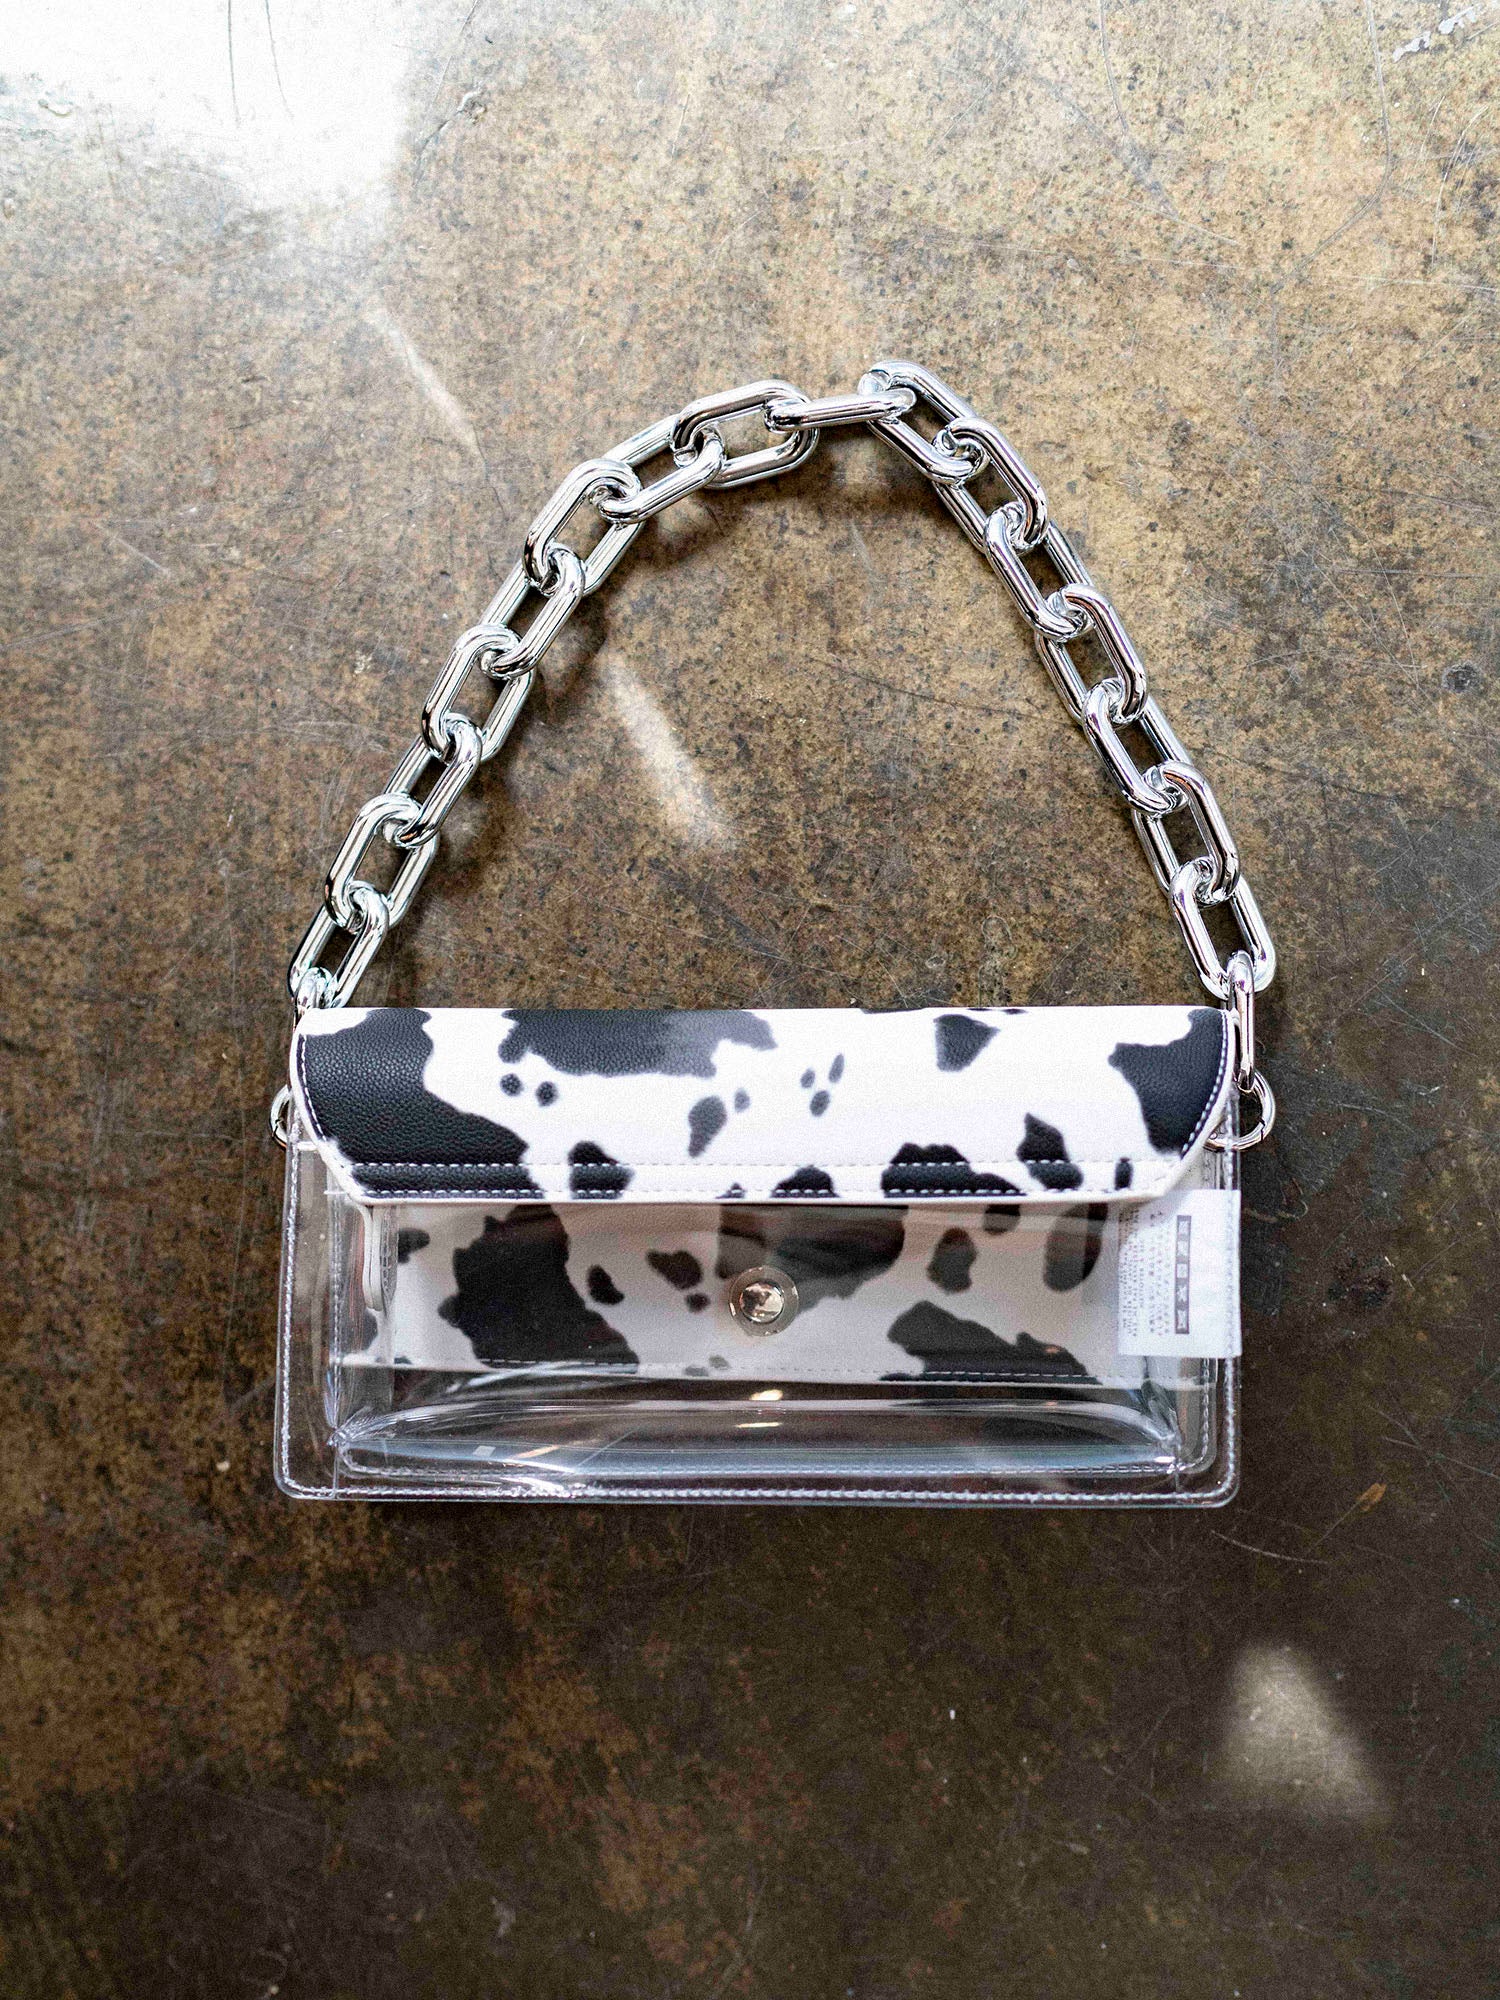 Cow Print Key Ring Coin Purse - 100% Polyester - Zipper closure -  Approximately 5.5